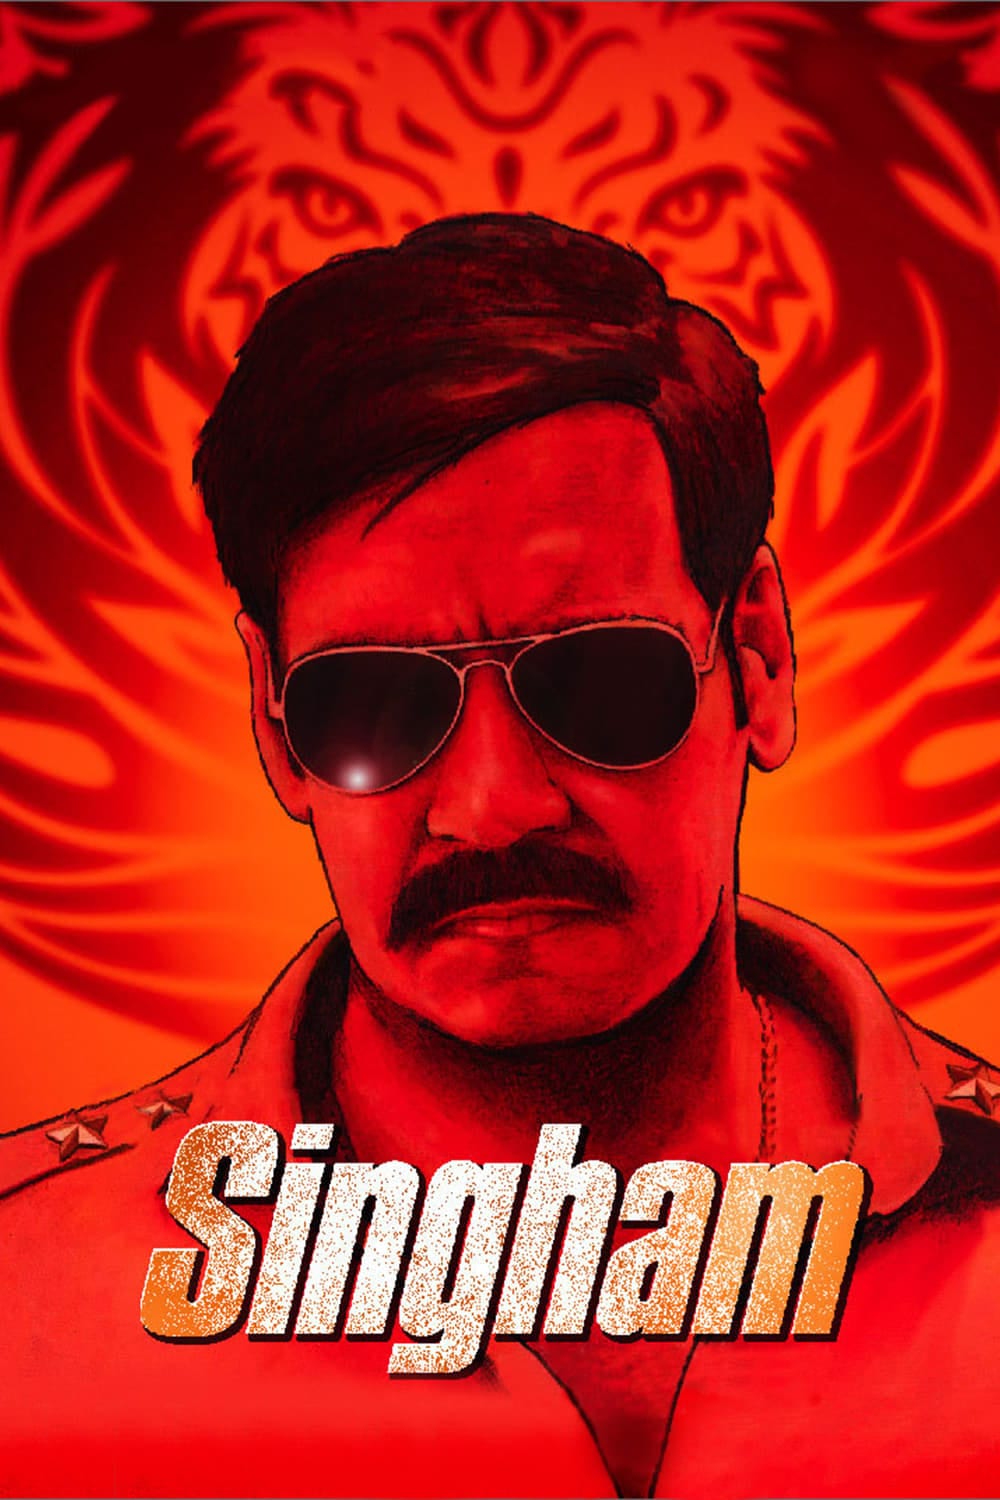 Poster for the movie "Singham"